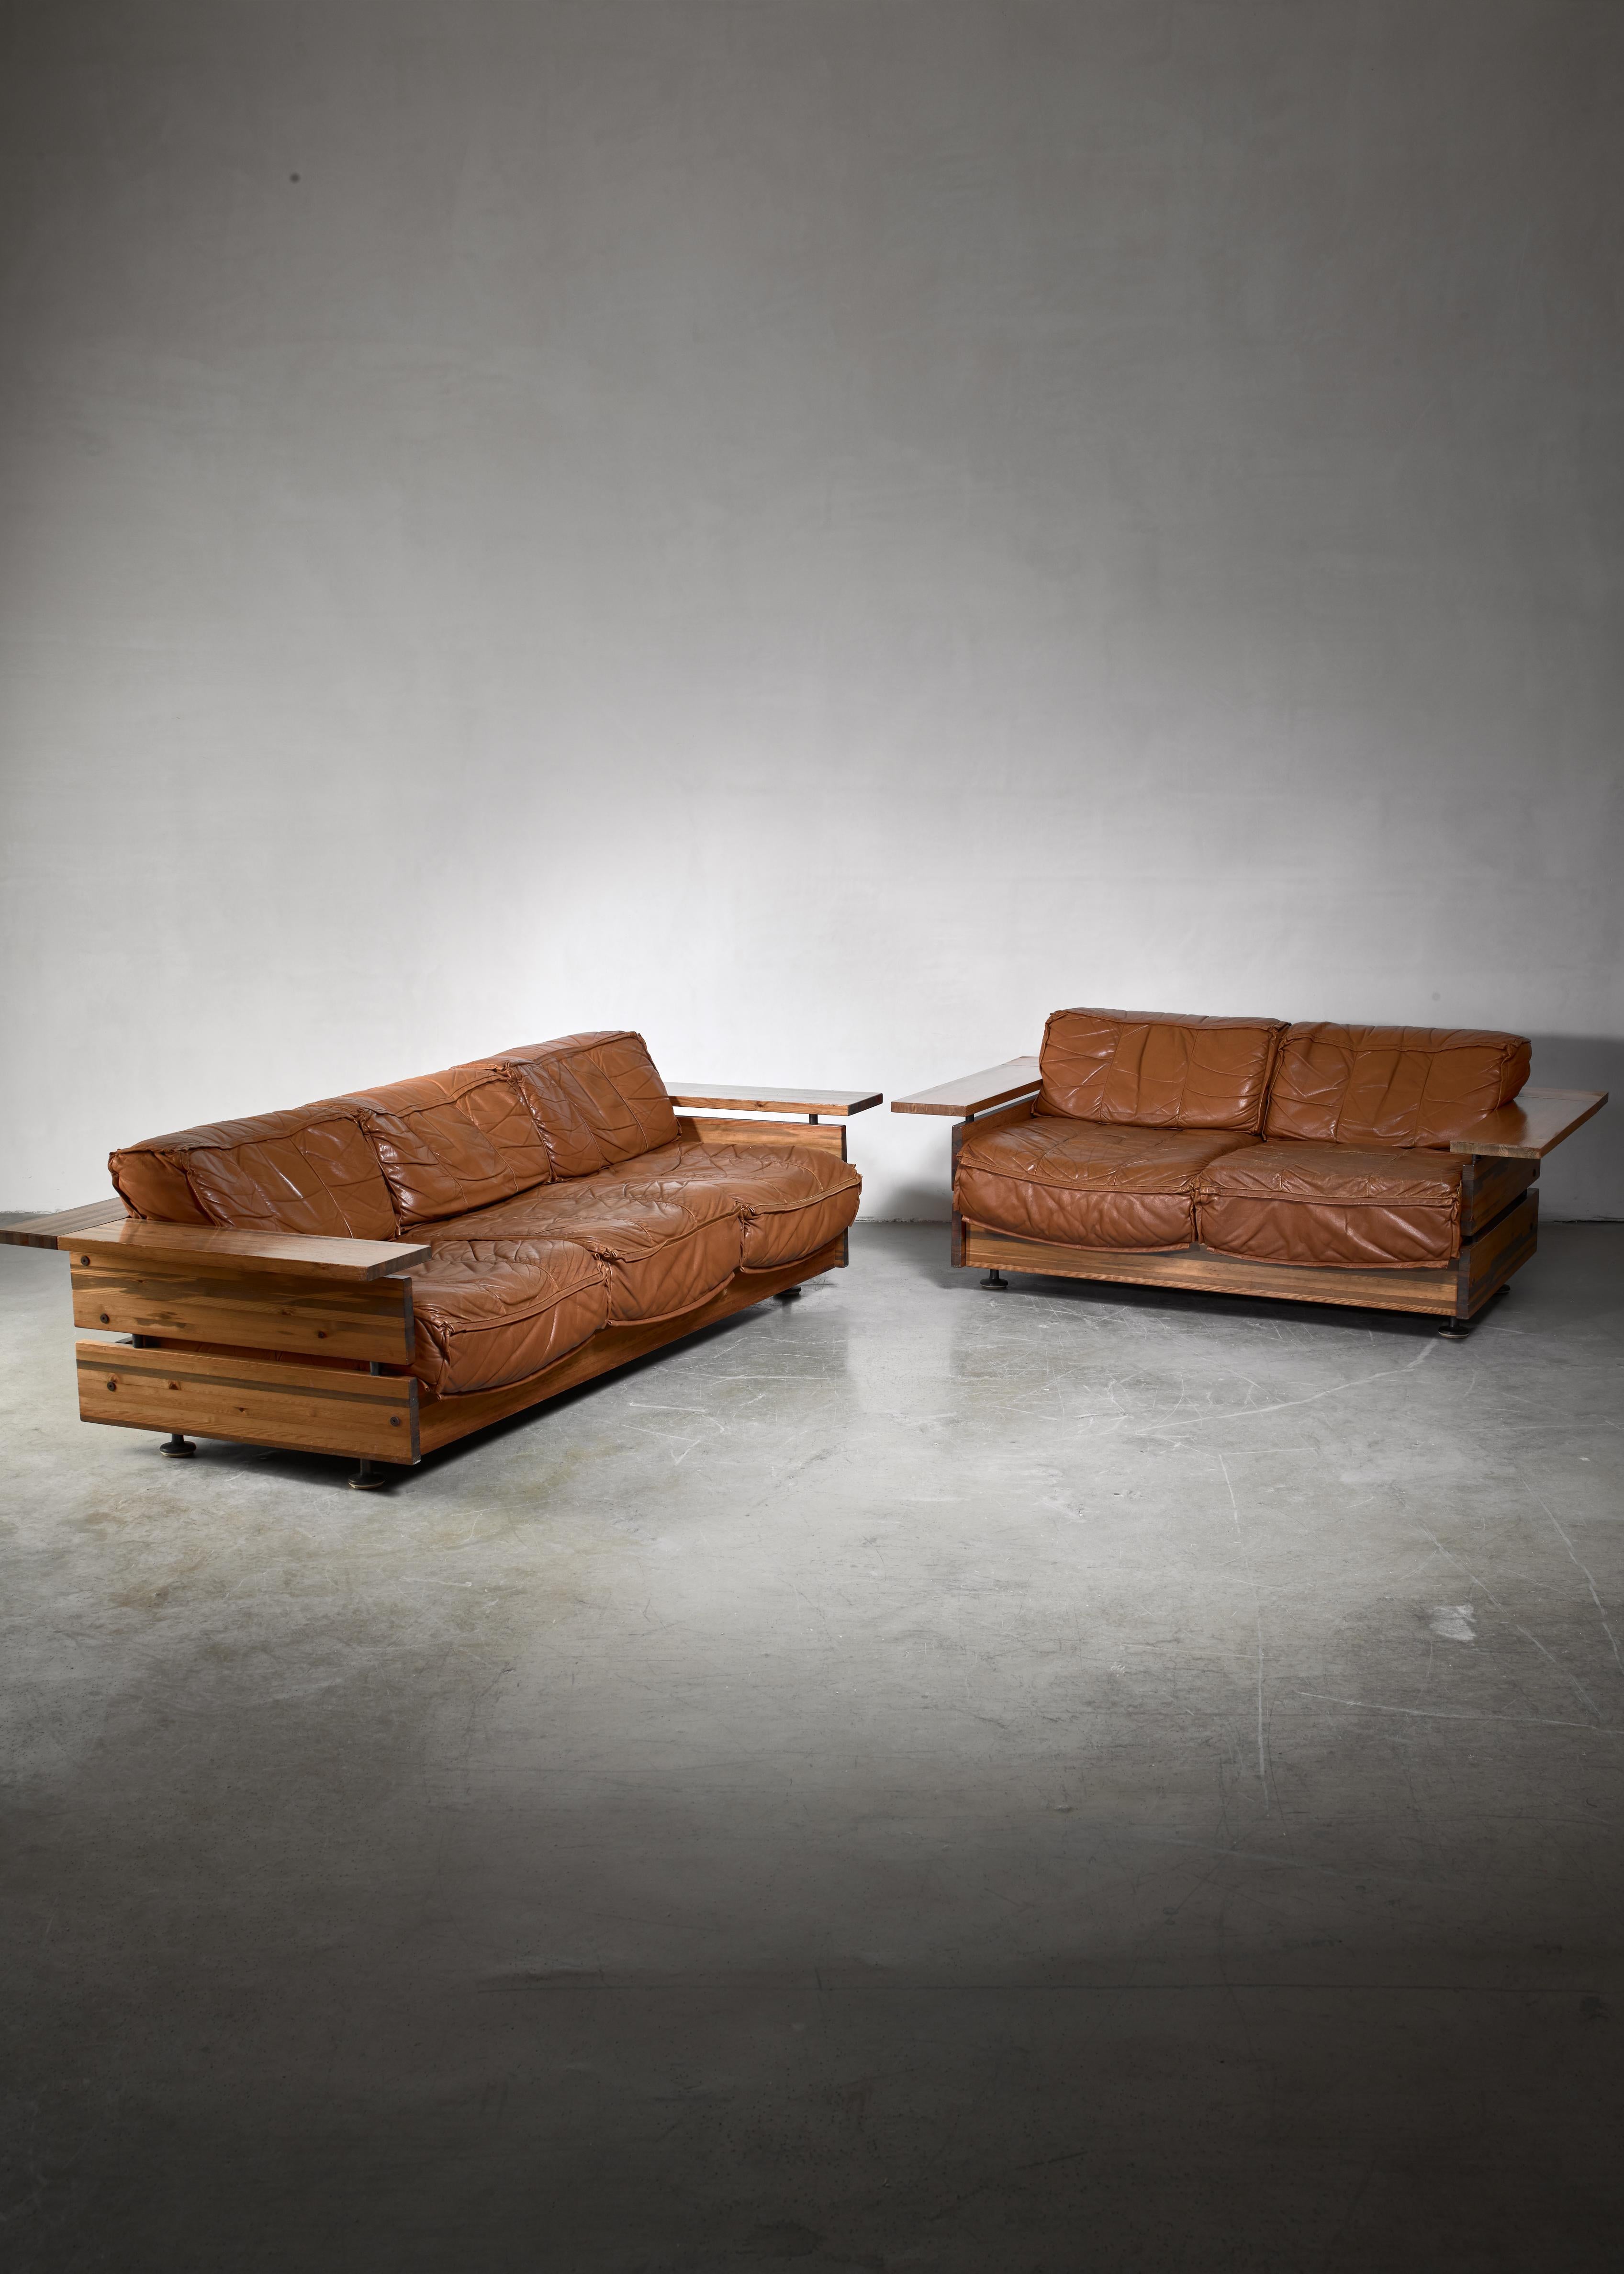 A Finnish sofa set by Hämeen Kalustaja. The three-seat and two-seat sofa are made of stained pine with brown leather cushions.

The measurements stated are of the larger sofa. The two-seat is 168 cm wide. Marked by Hämeen Kalustaja.
 